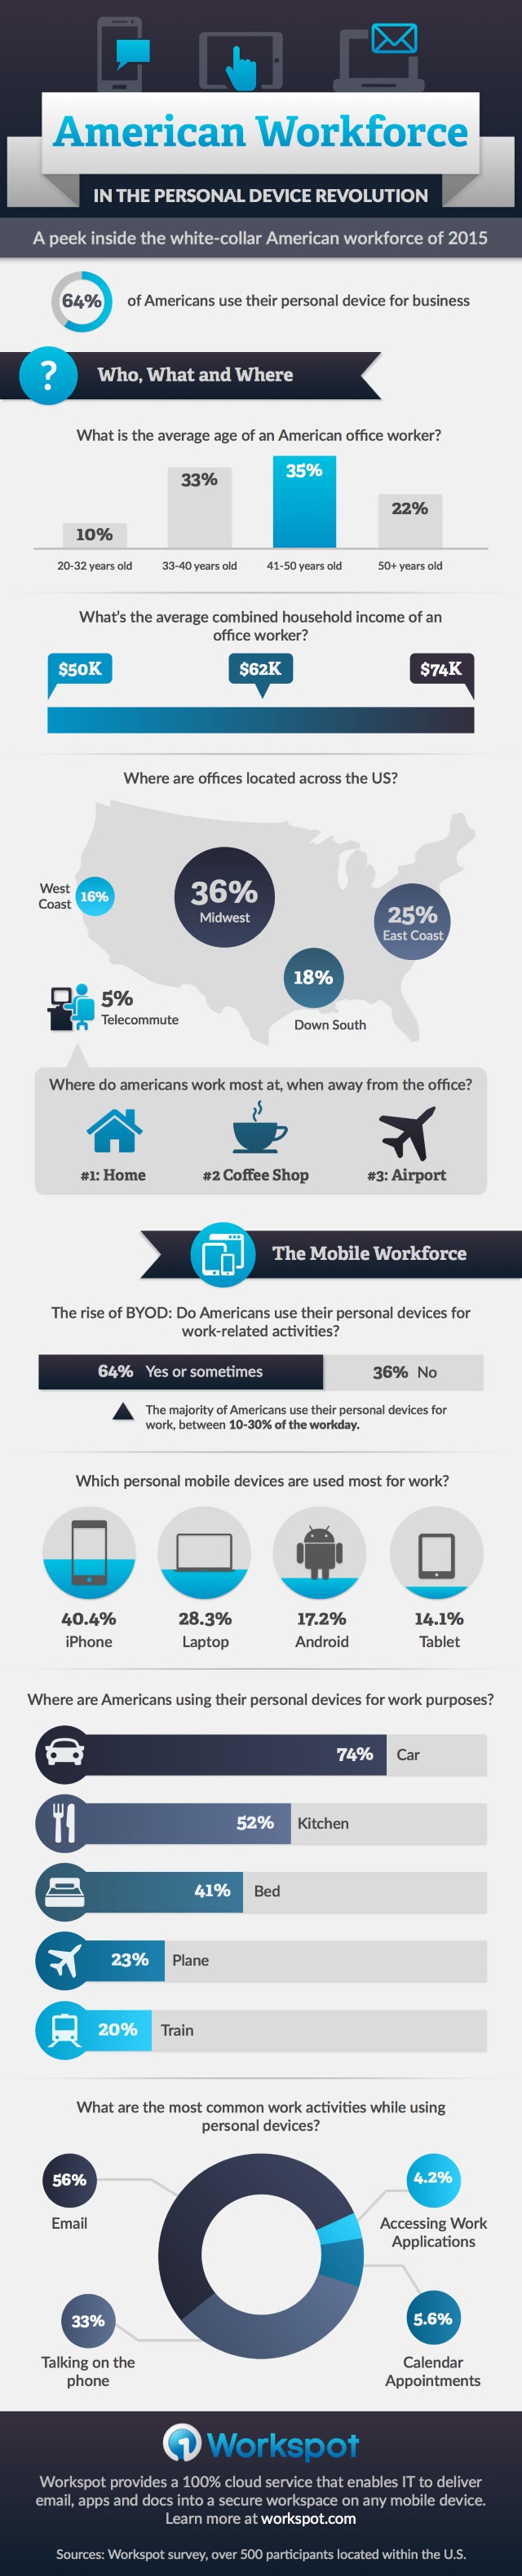 Workspot infographic